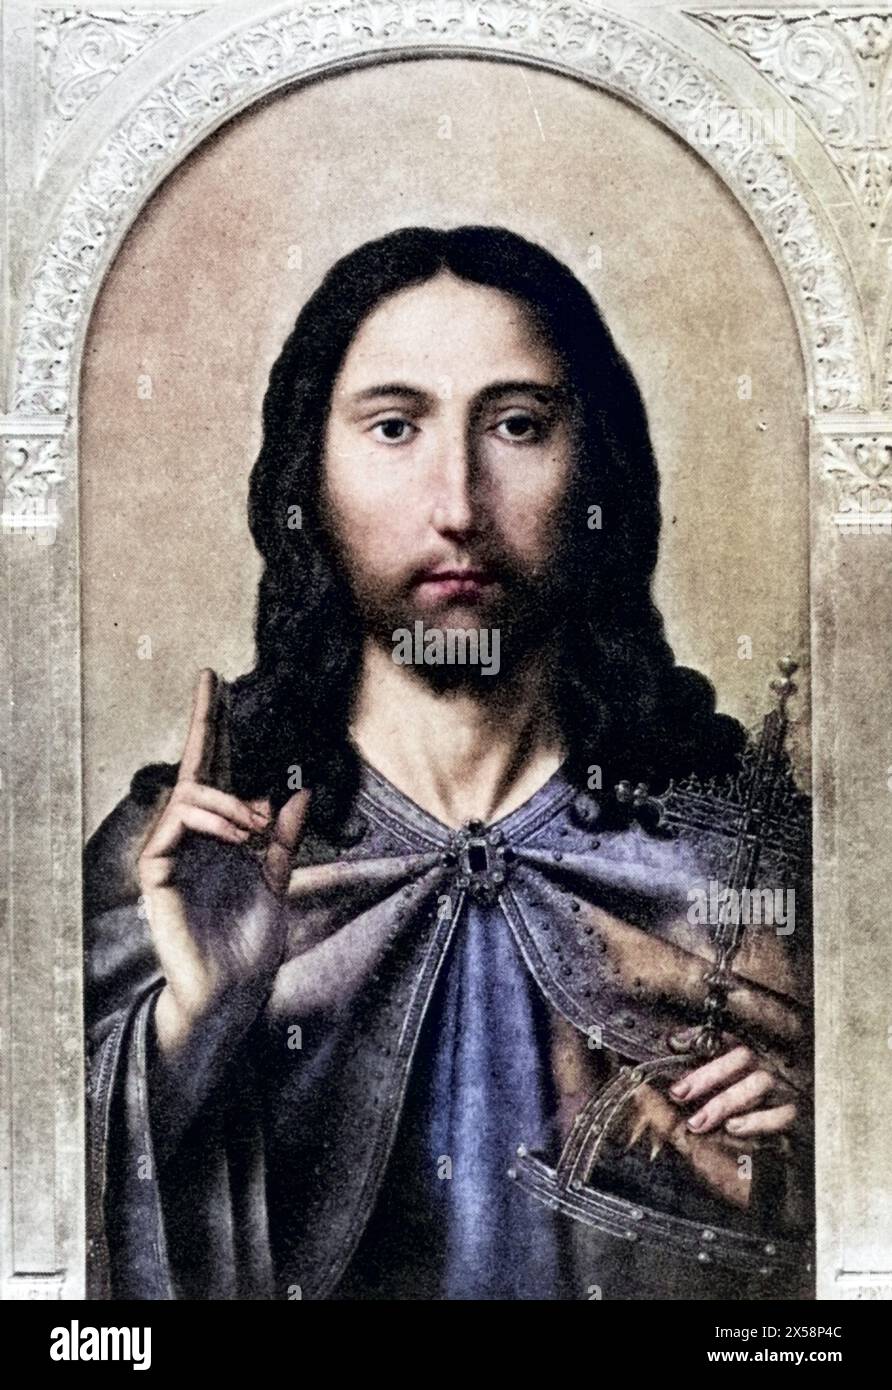 Jesus Christus,probably 4 BC - 30 / 31 AD, Jewish itinerant preacher and founder of a religion, portrait, ARTIST'S COPYRIGHT HAS NOT TO BE CLEARED Stock Photo